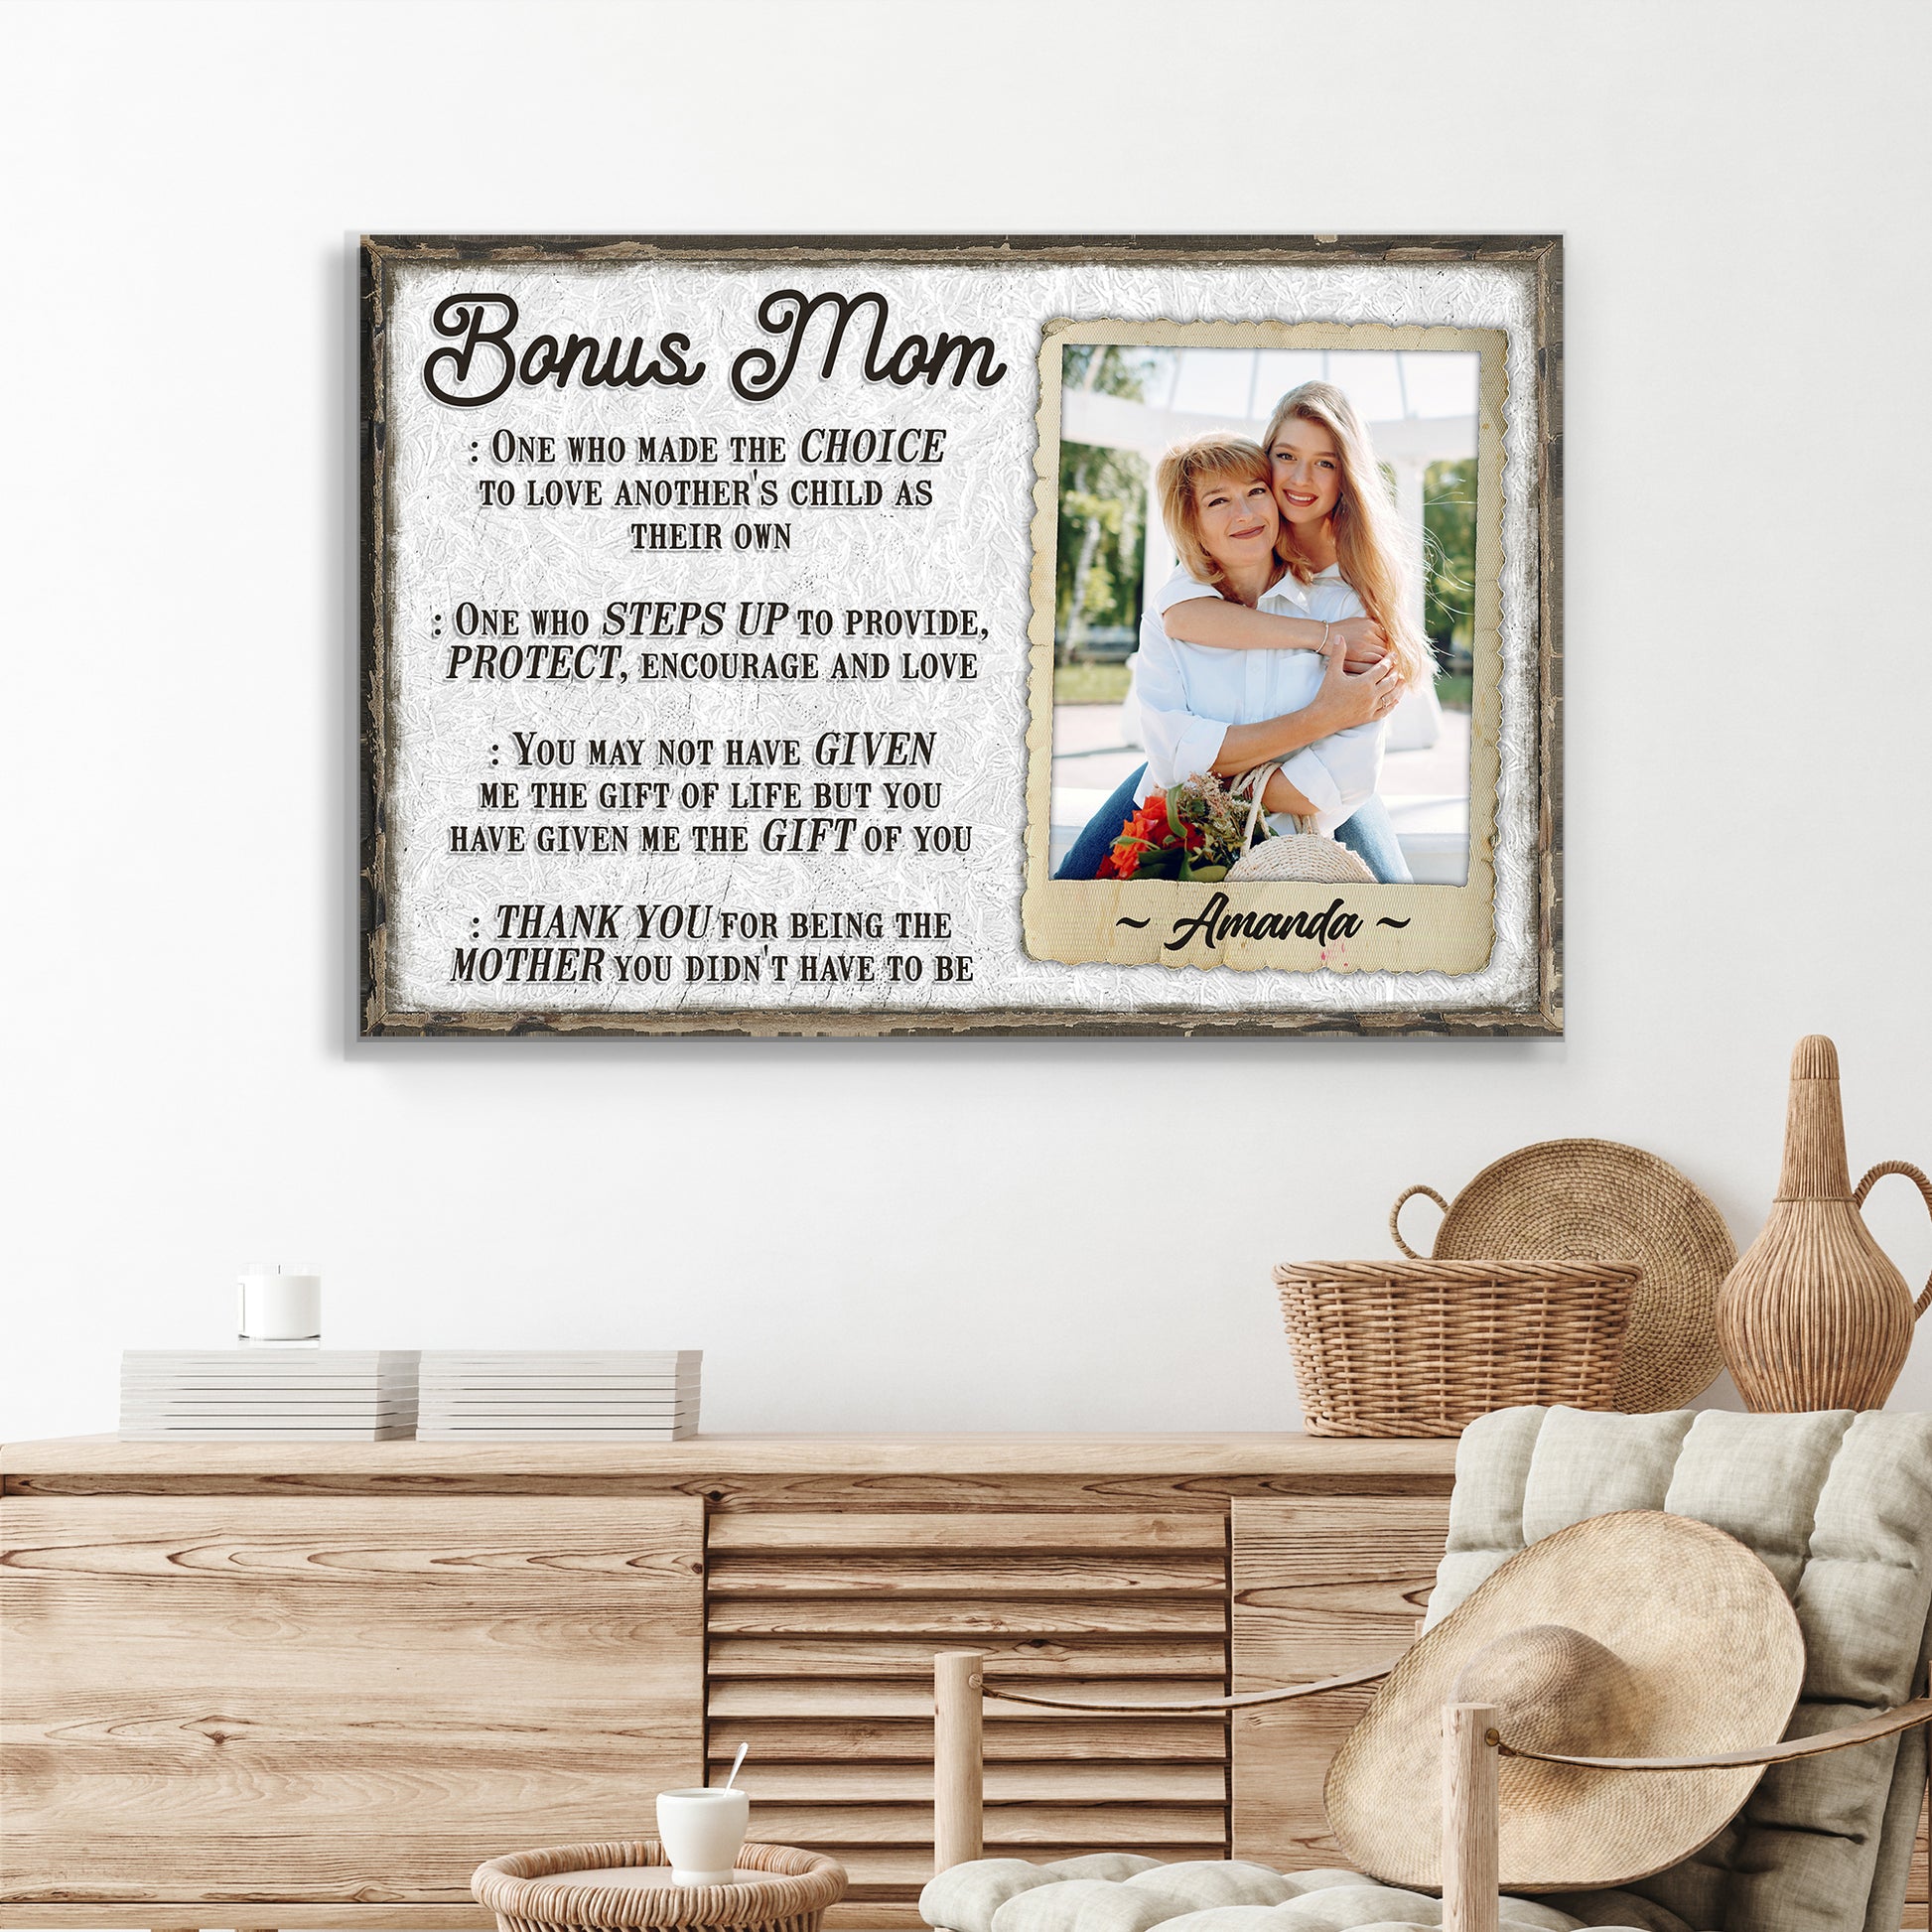 Bonus Mom Customized Sign Style 2 - Image by Tailored Canvases